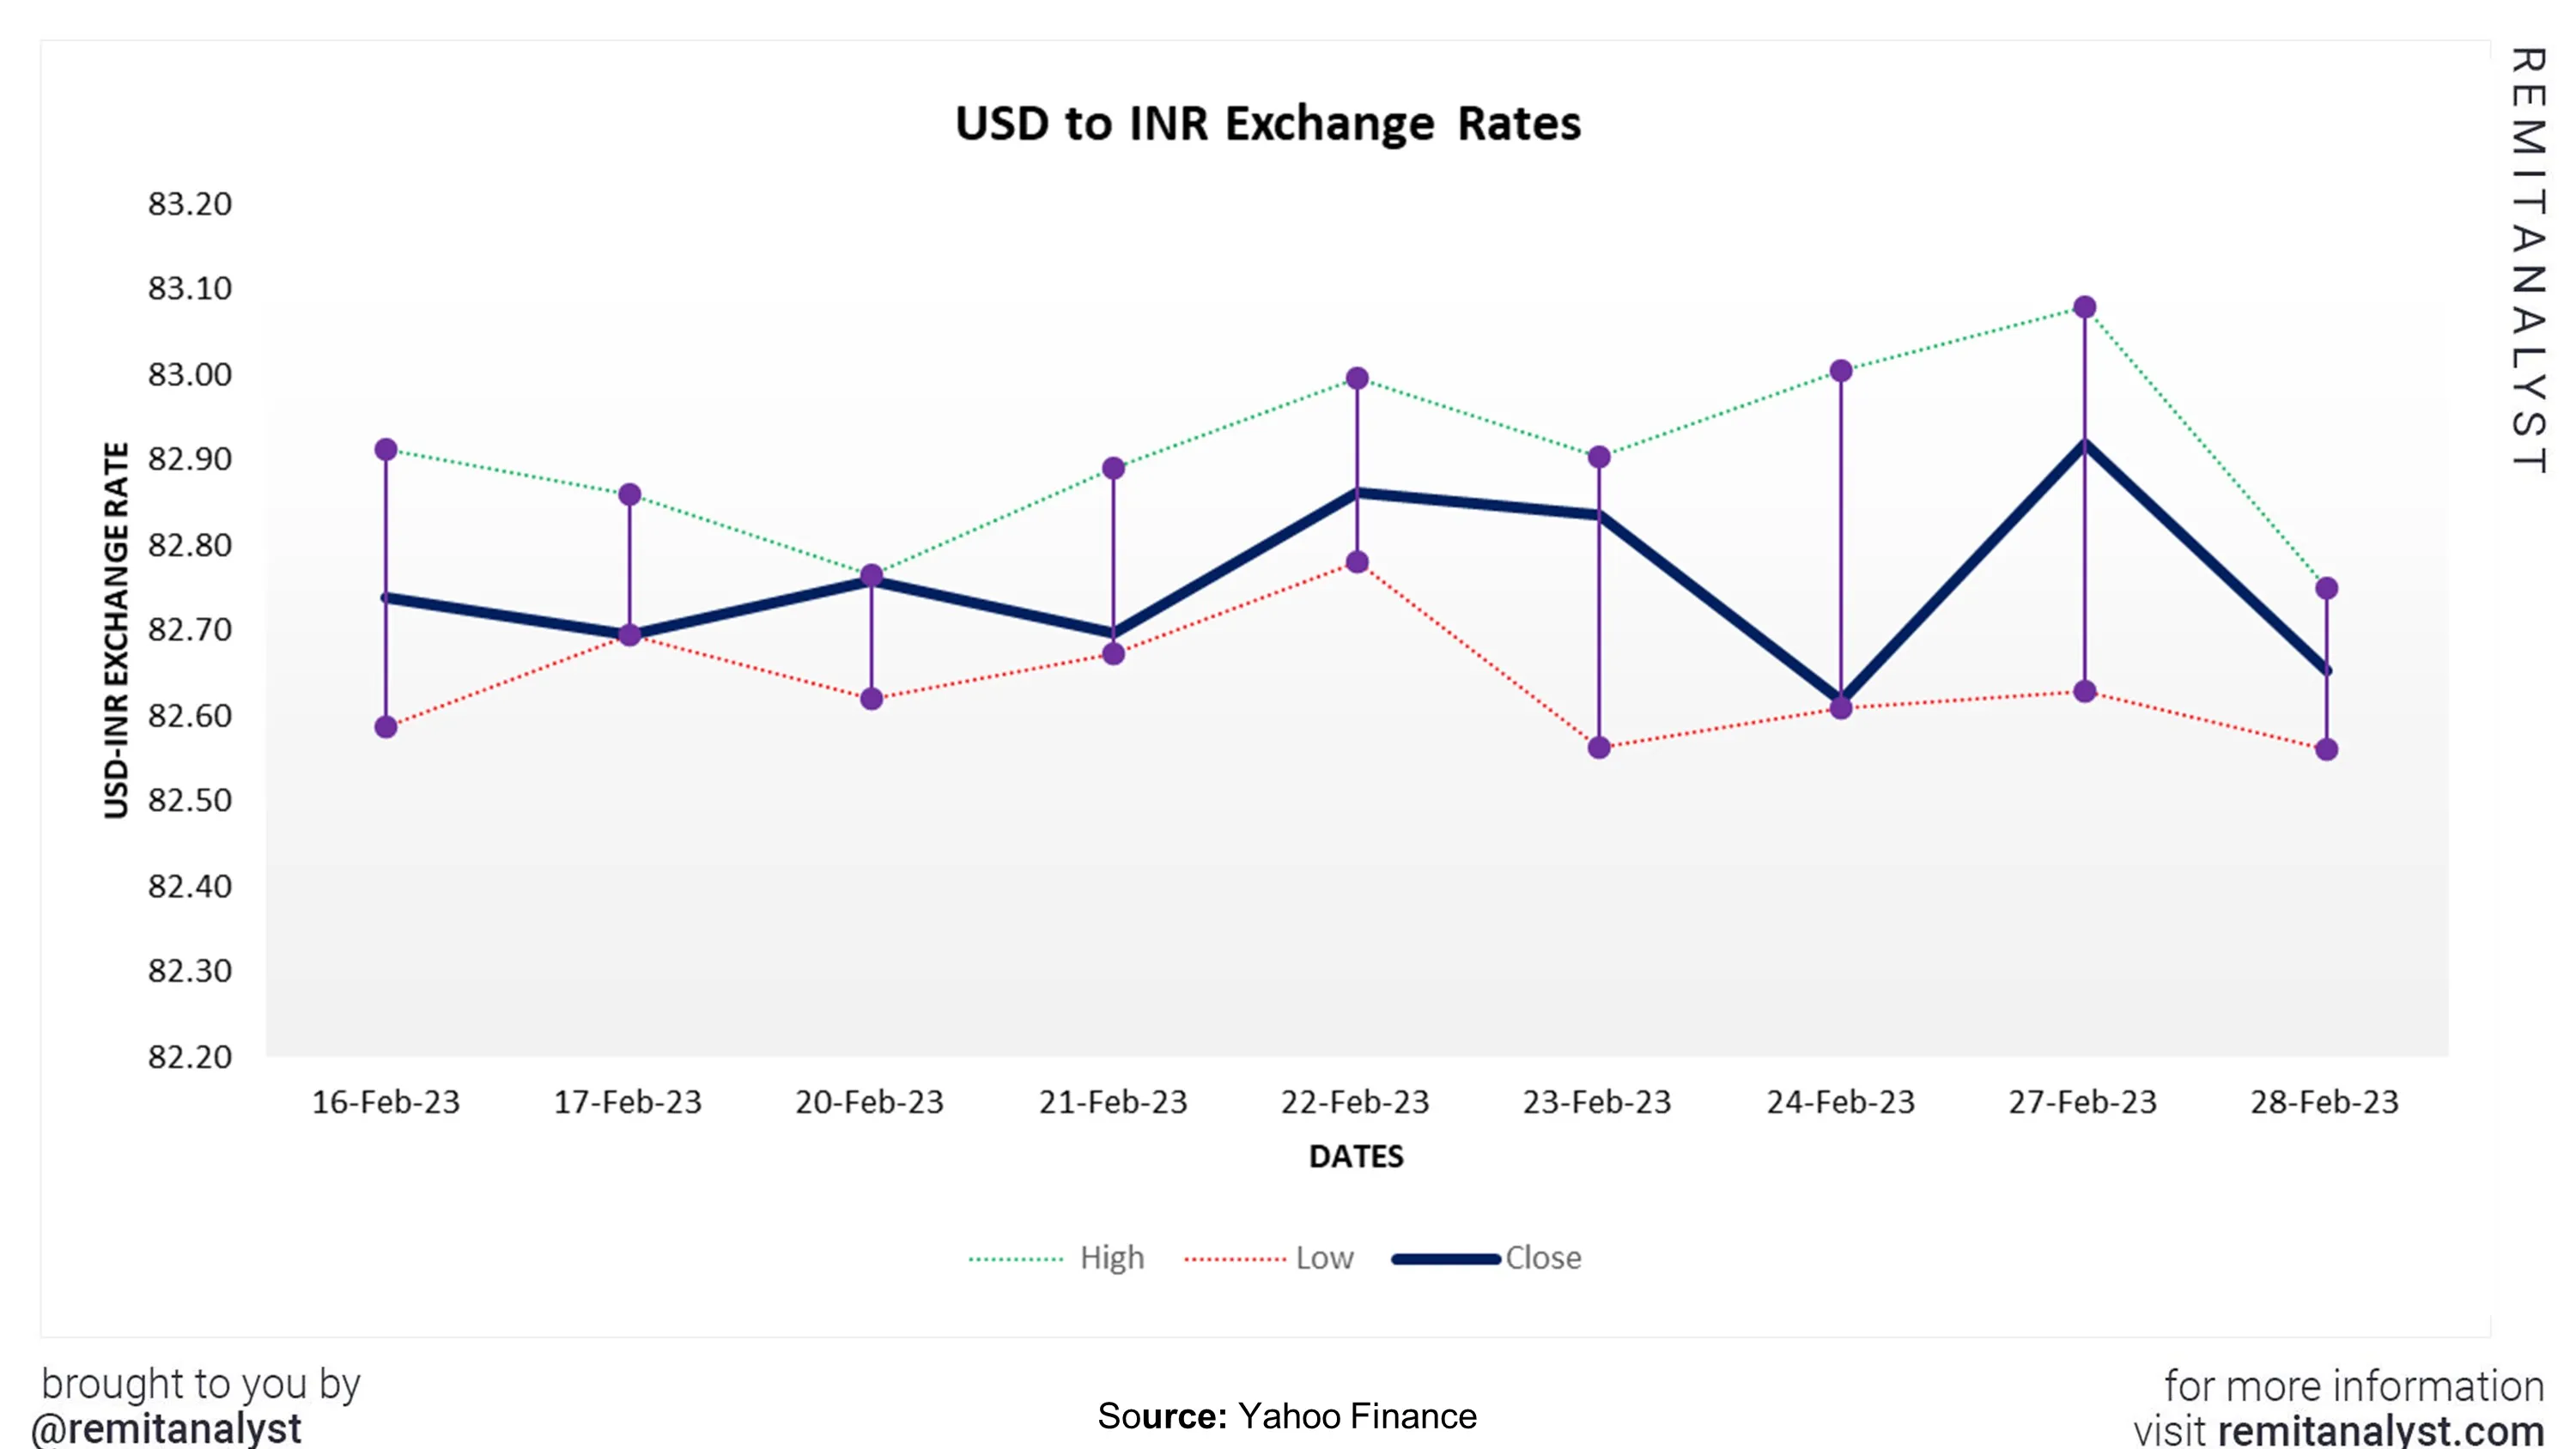 usd-to-inr-exchange-rate-from-16-feb-2023-to-28-feb-2023